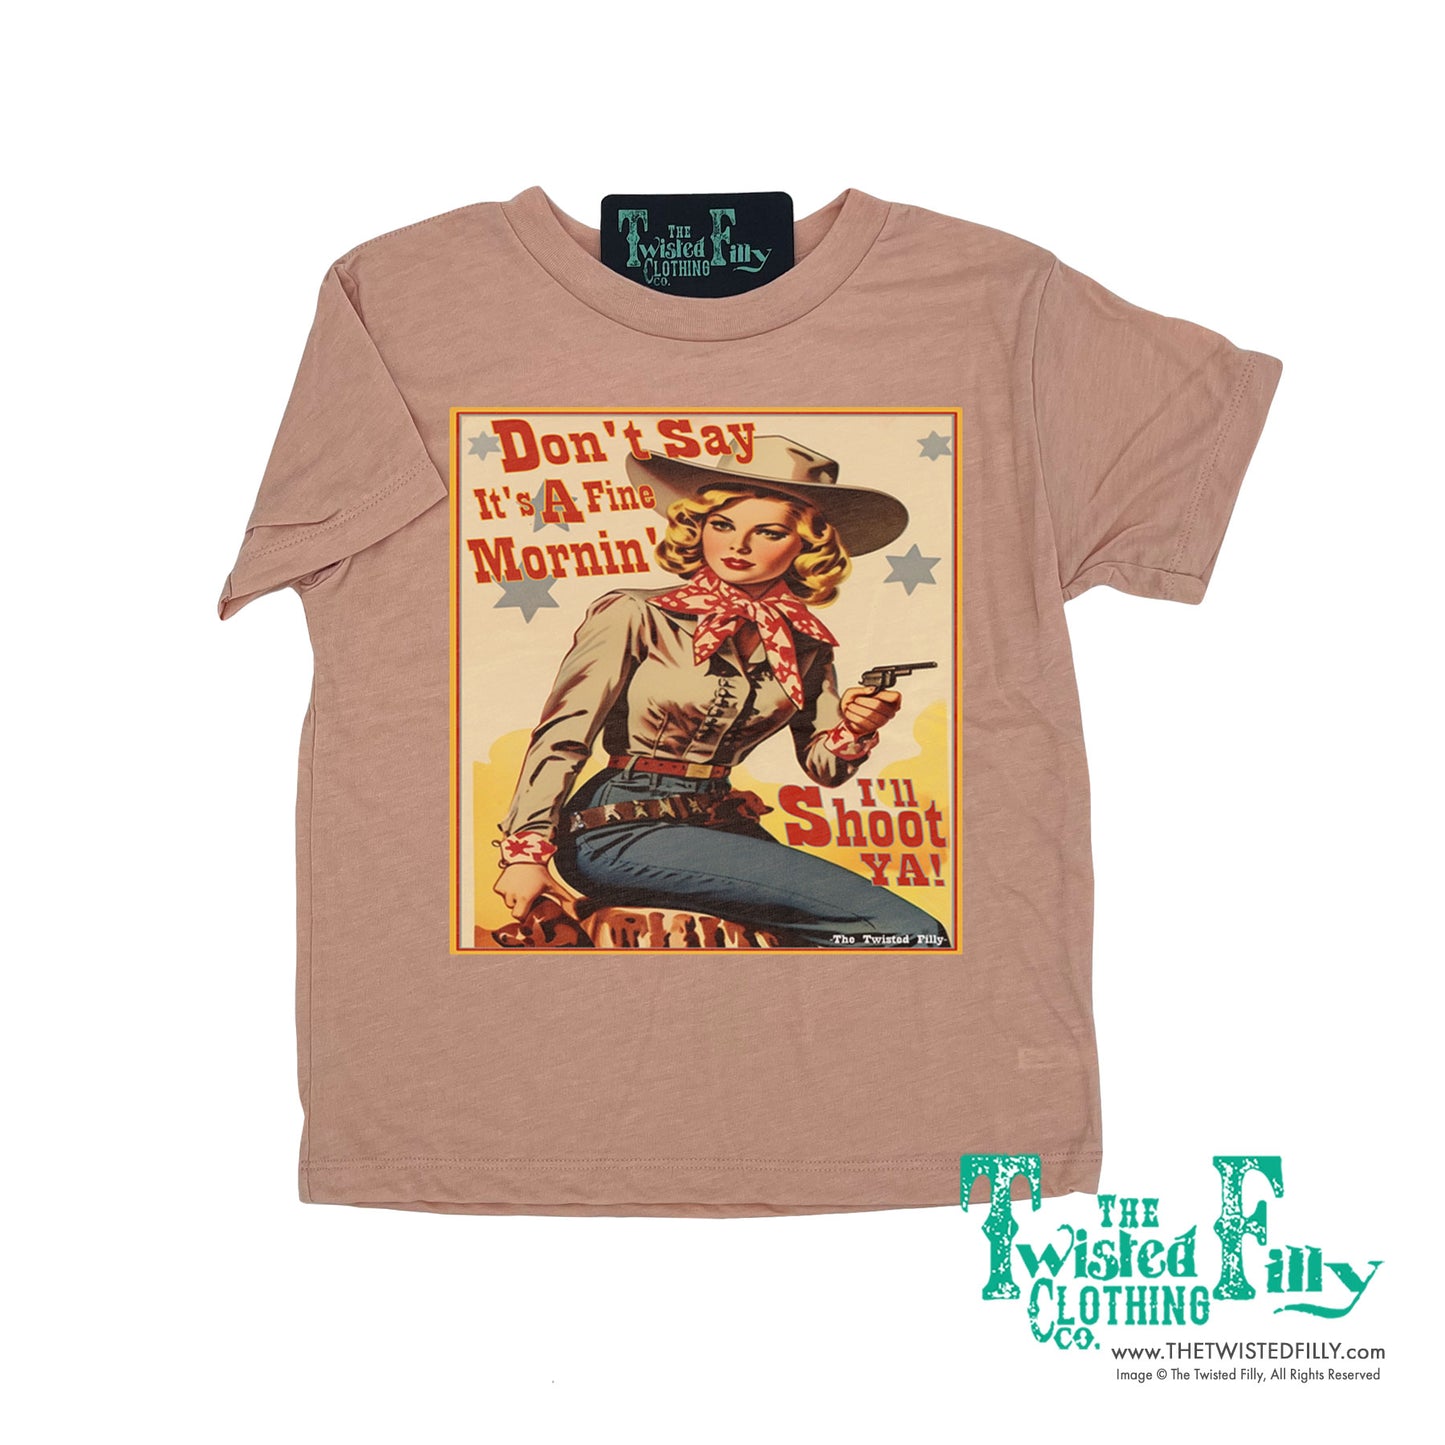 Don't Say It's A Fine Mornin' - S/S Girls Infant Tee - Assorted Colors